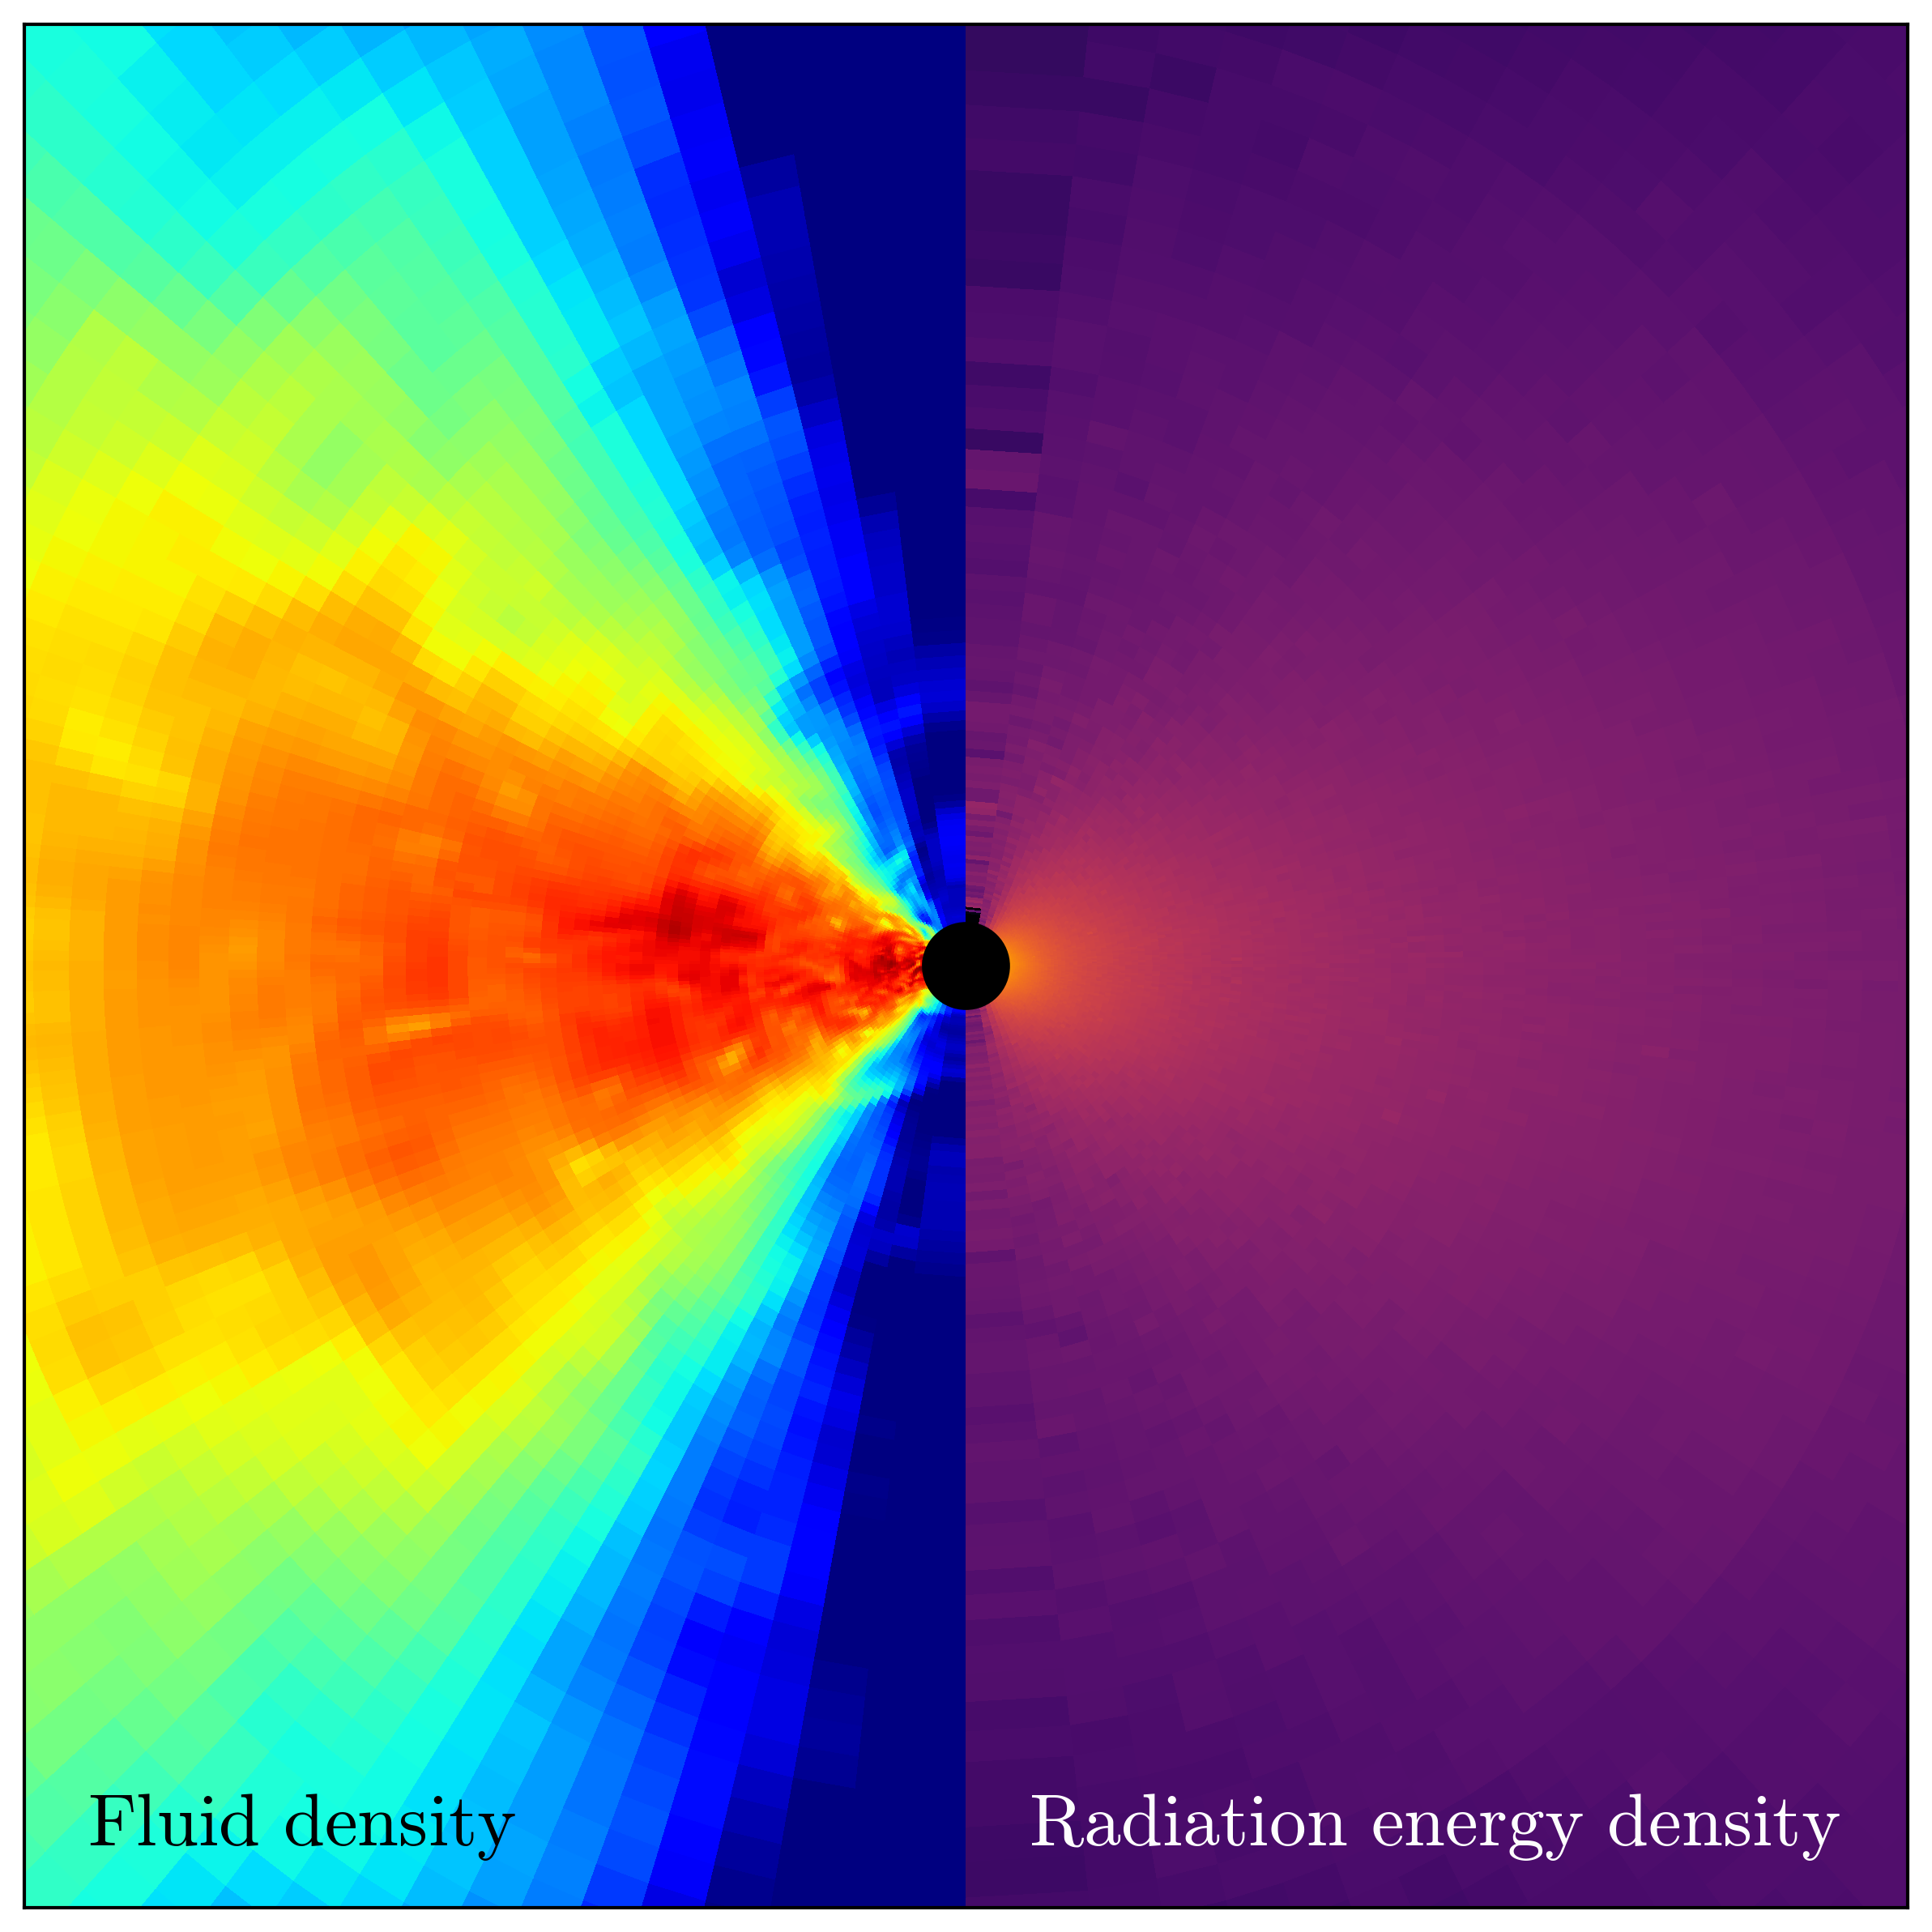 Black hole in the center, left shows the material in the disk while the right shows the radiation energy component  in the disk